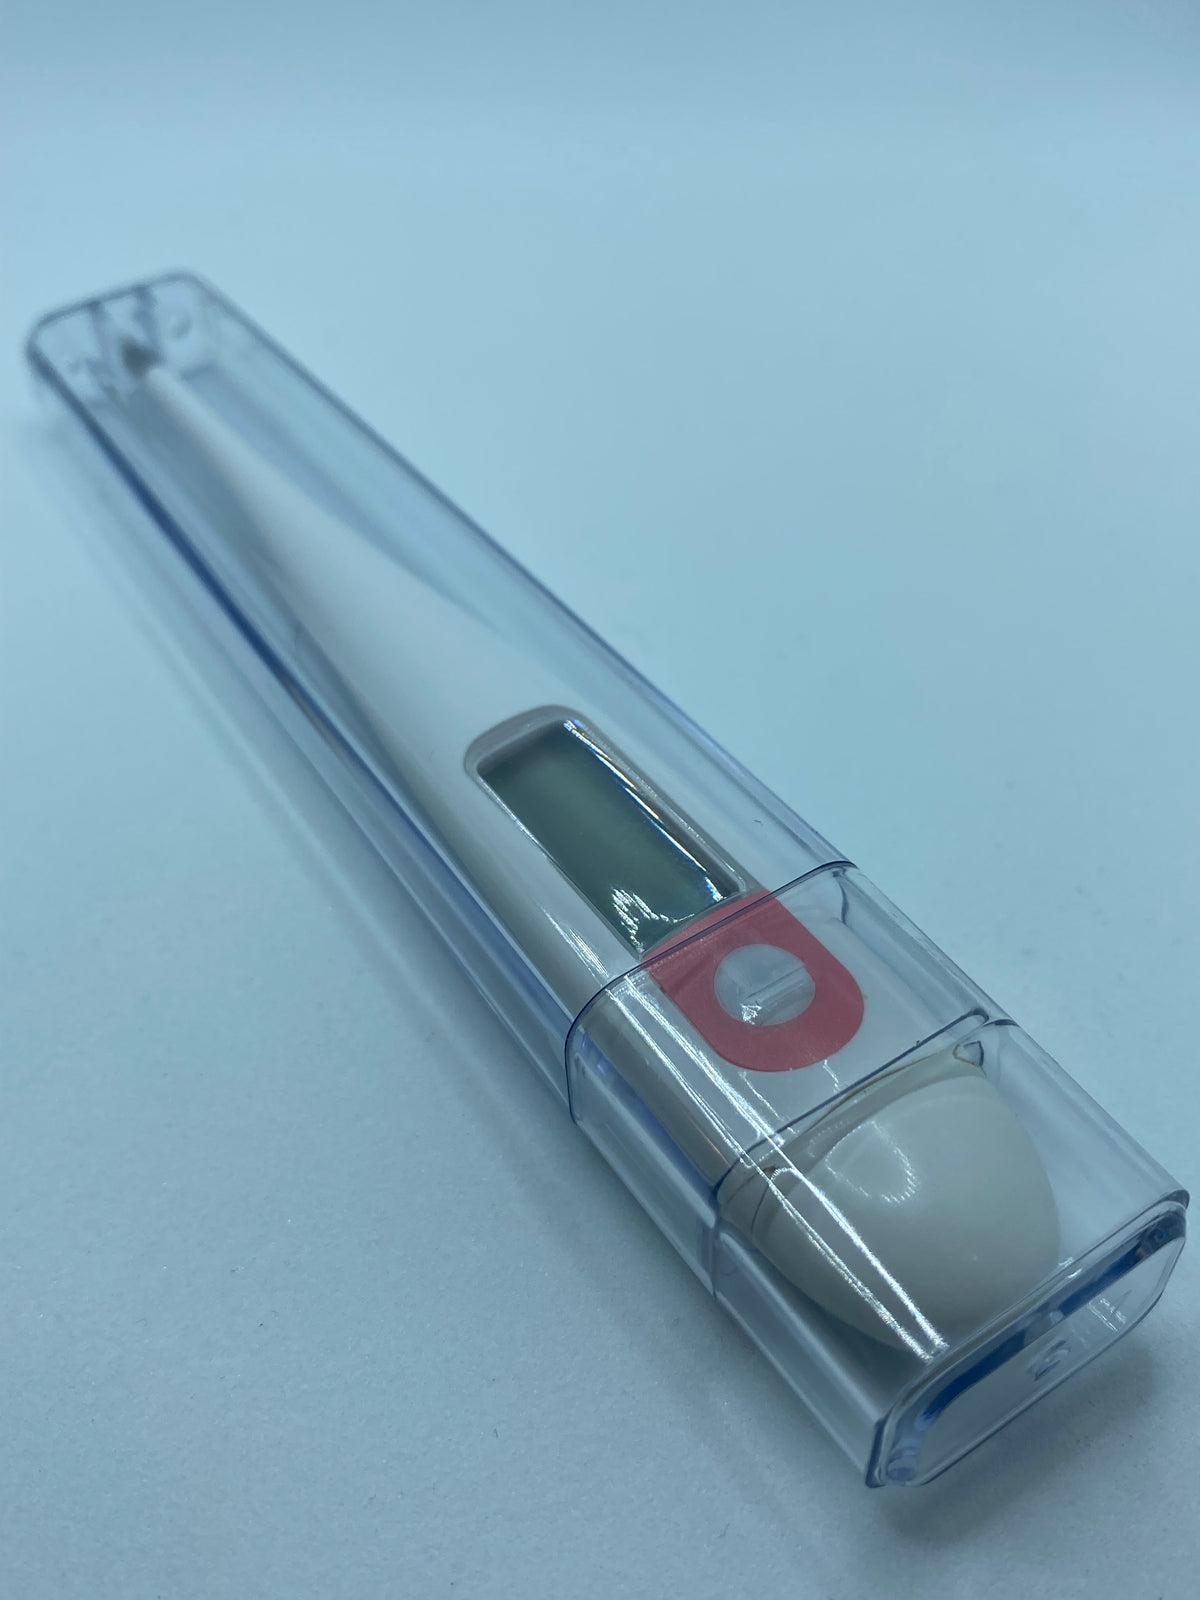 Digital Thermometer - Measures in Celsius